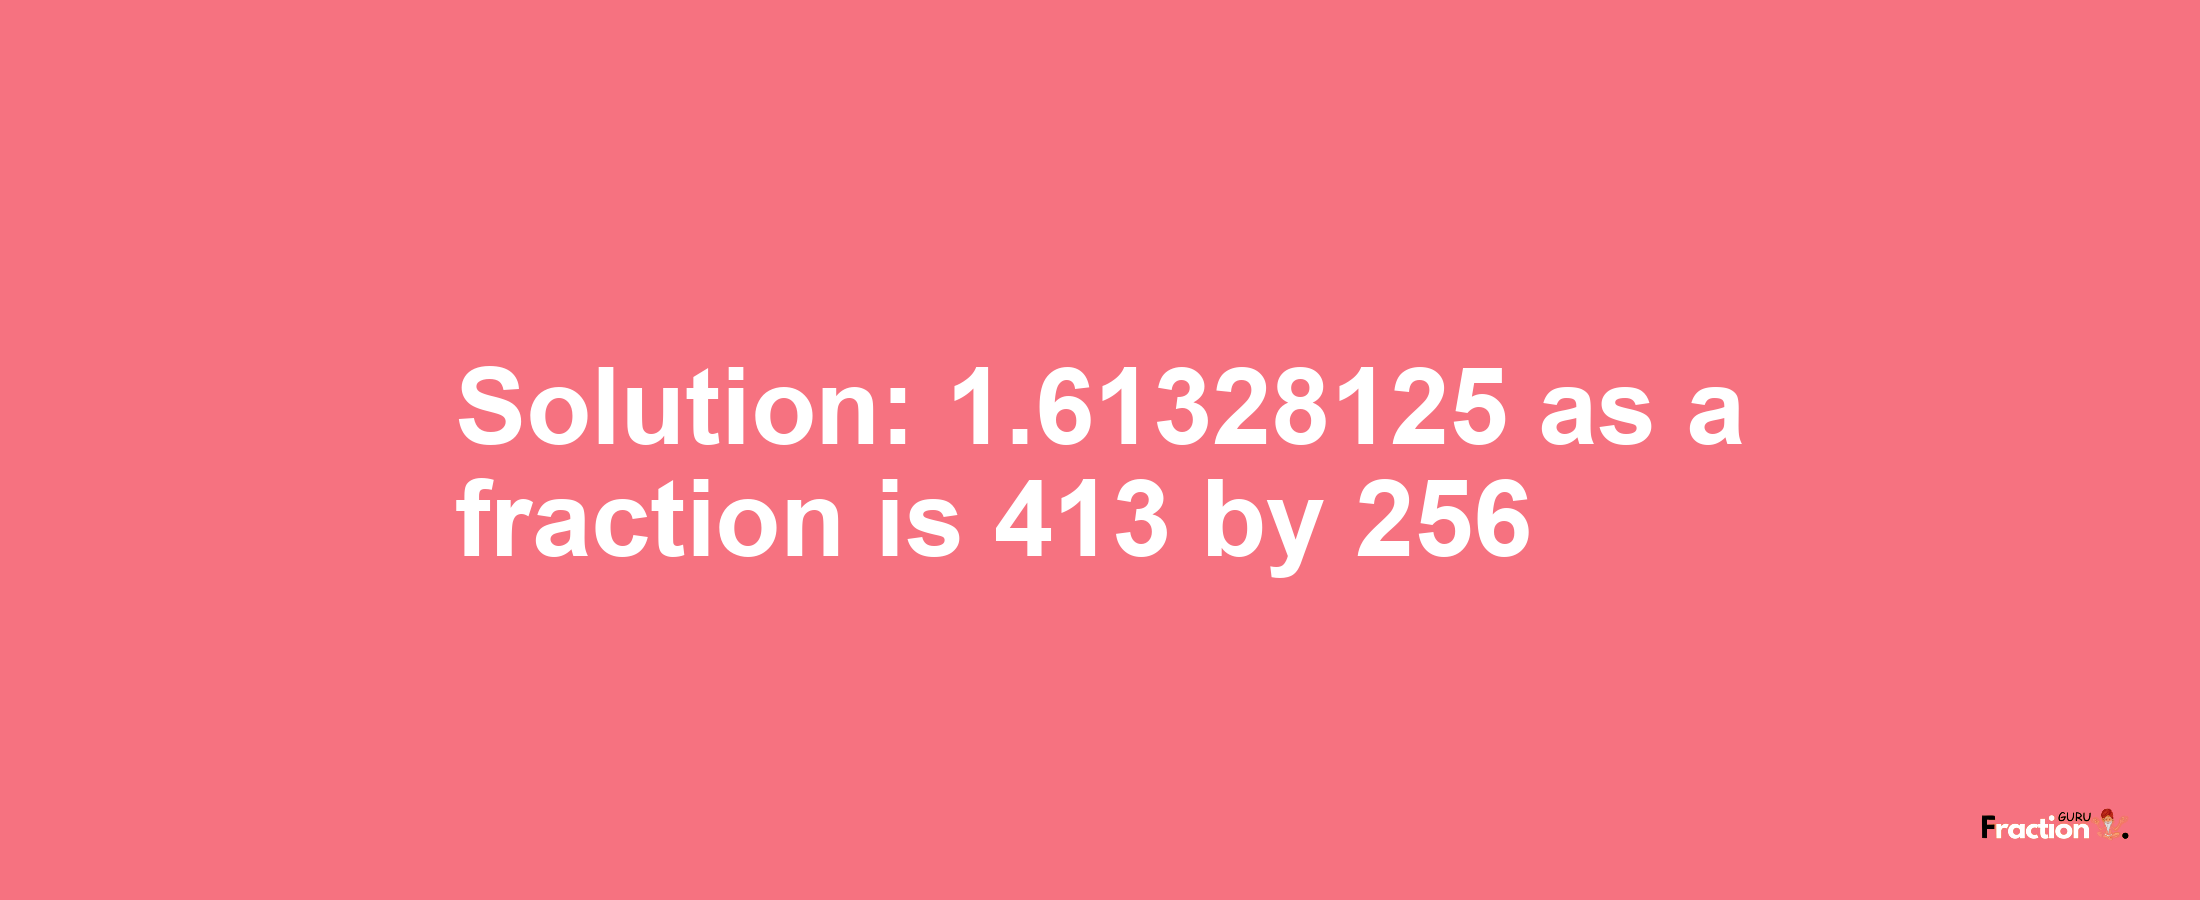 Solution:1.61328125 as a fraction is 413/256